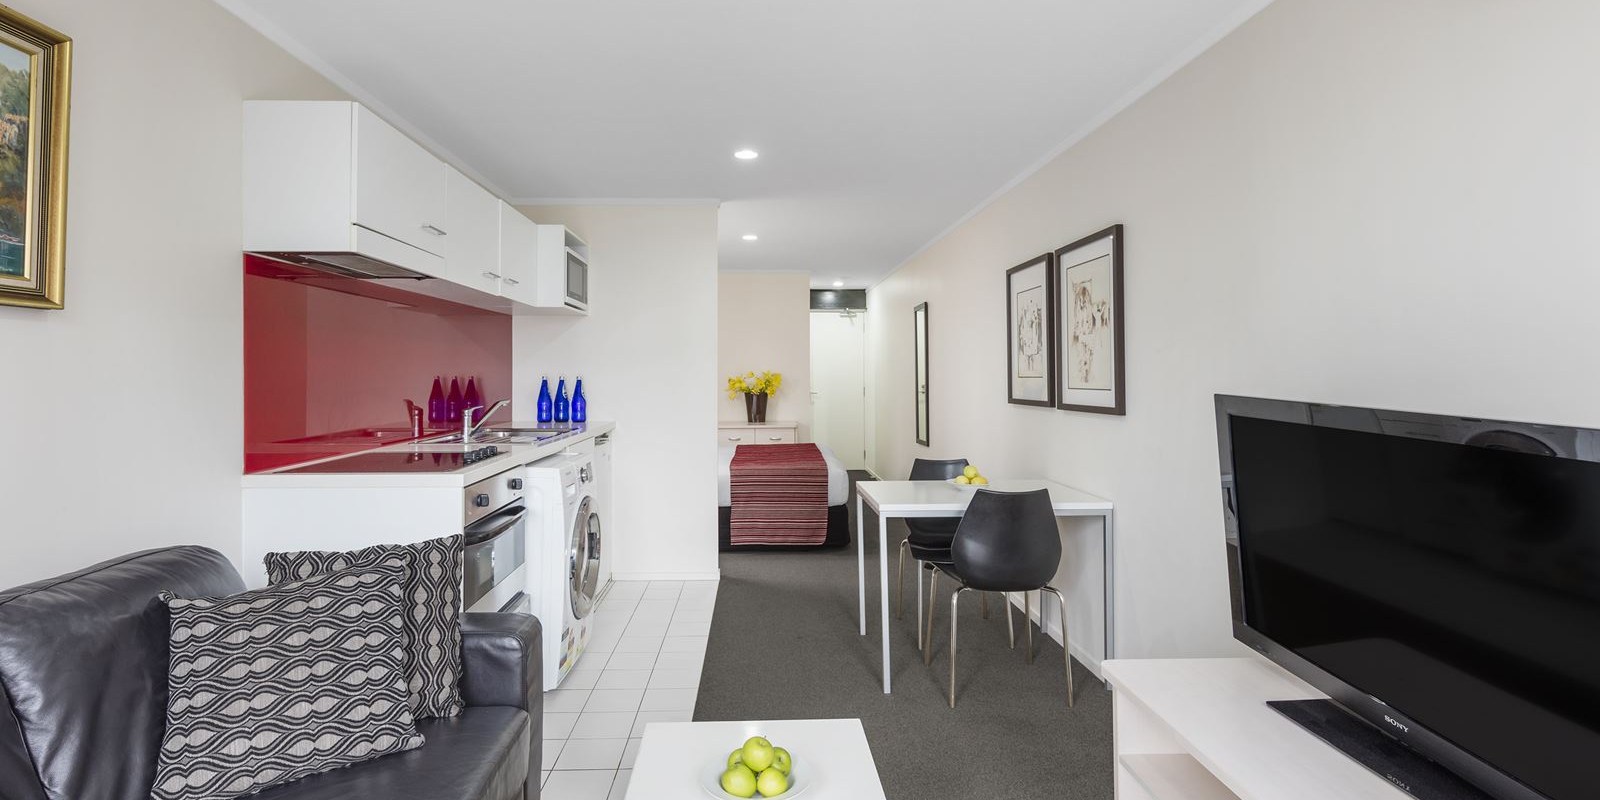 waldorf bankside auckland apartment accommodation